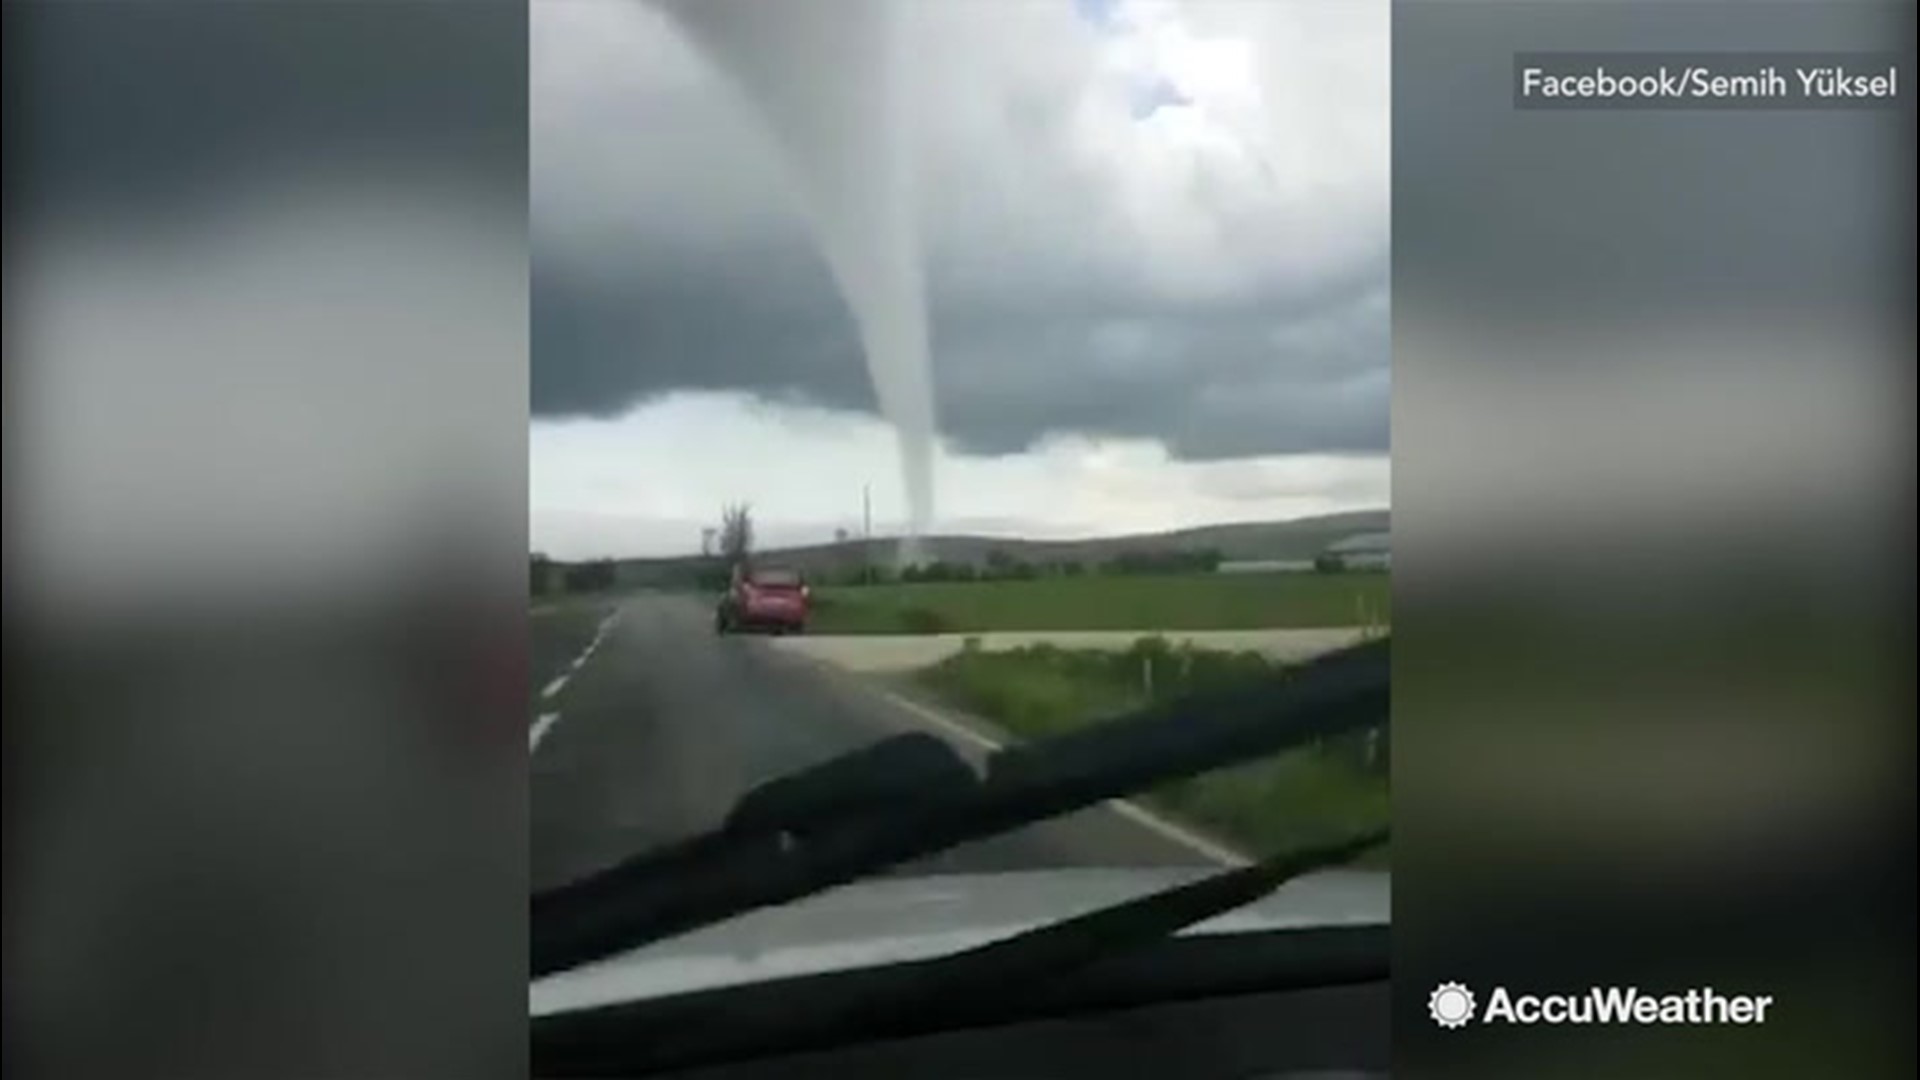 A tornado touched down in northern Turkey on June 11. The shapeshifting twister was captured by a photographer near the town of Devrekani, Turkey.